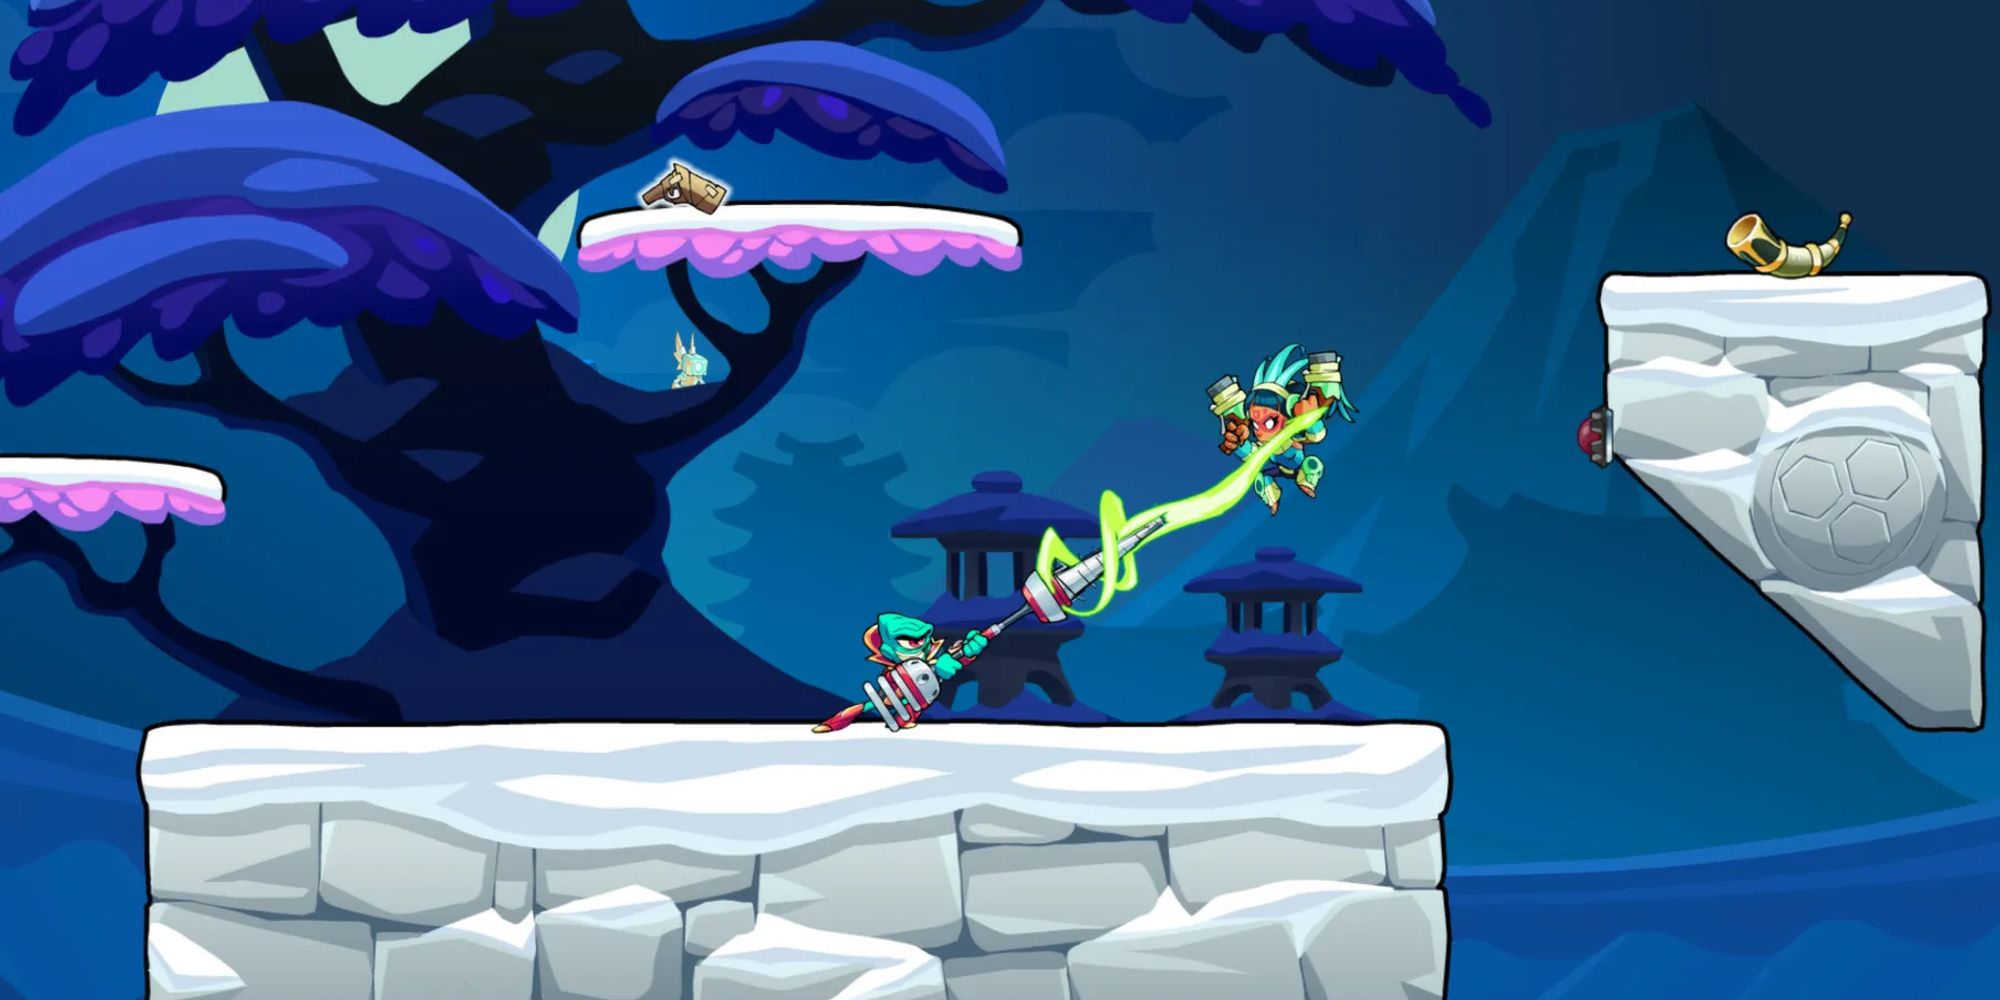 Alien Character Fighting Aztec Based Character With A Laser Weapon In Brawlhalla